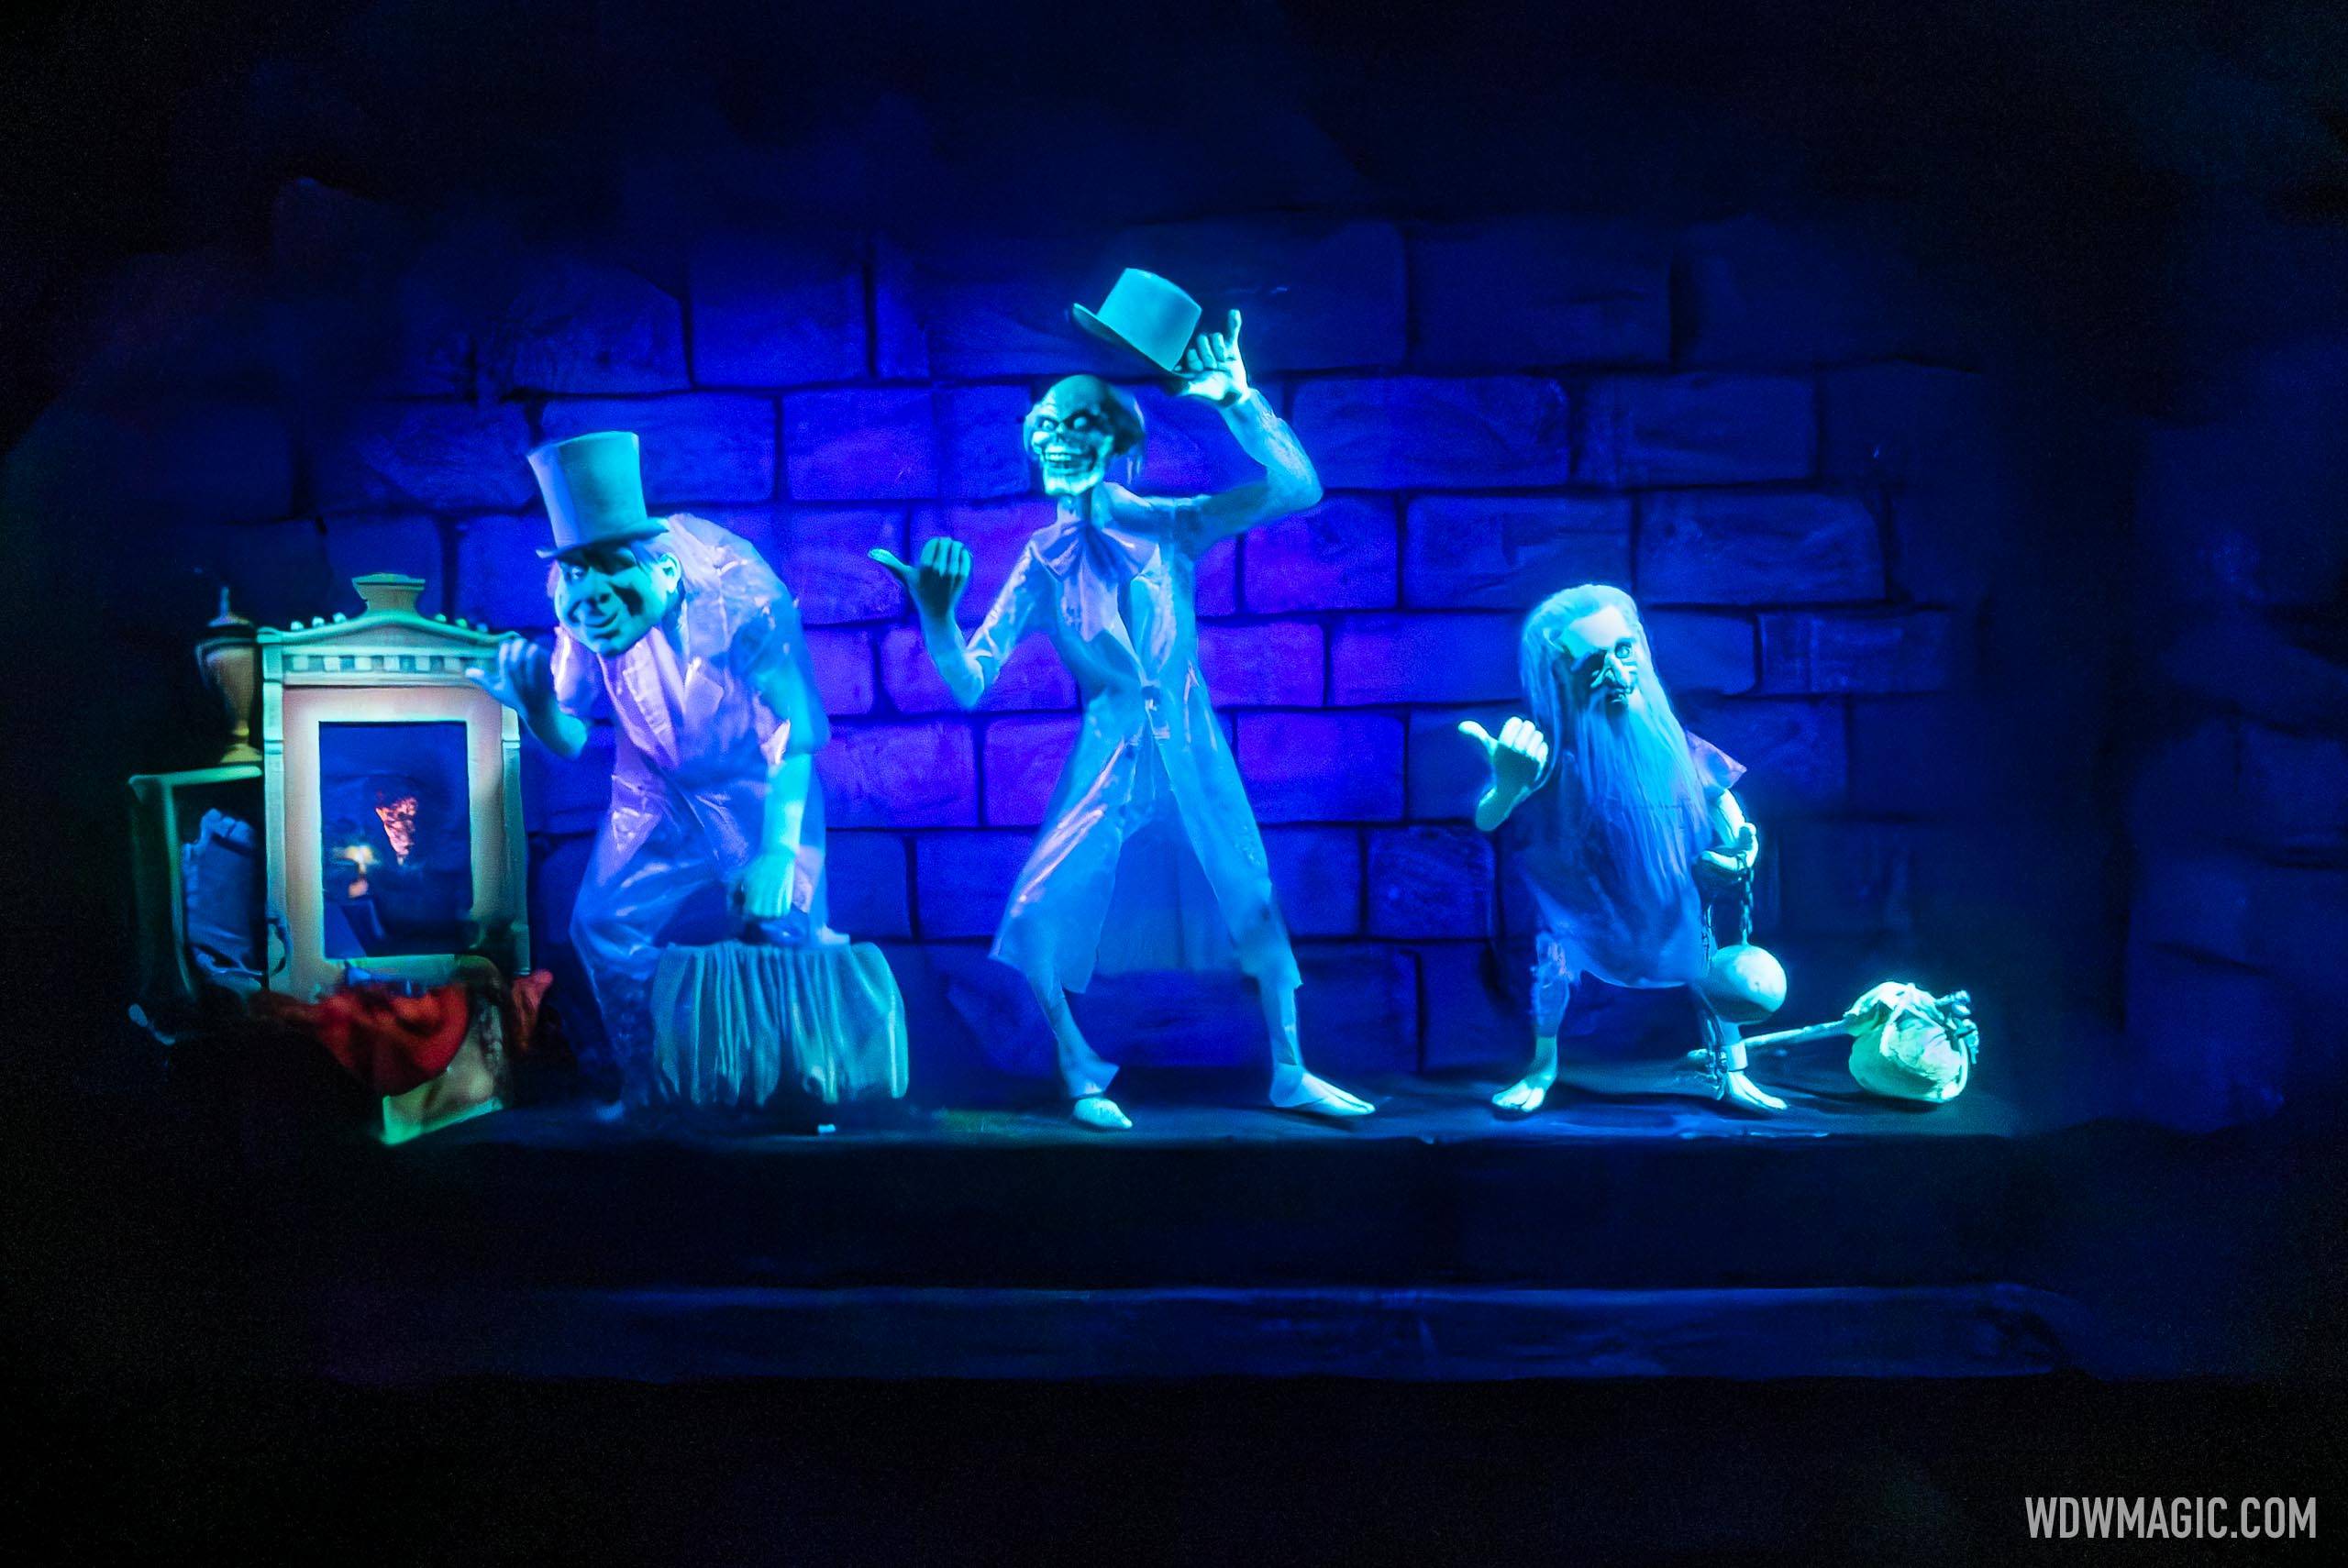 VIDEO - A behind-the-scenes look at the new Hitchhiking Ghosts scene with Walt Disney Imagineering